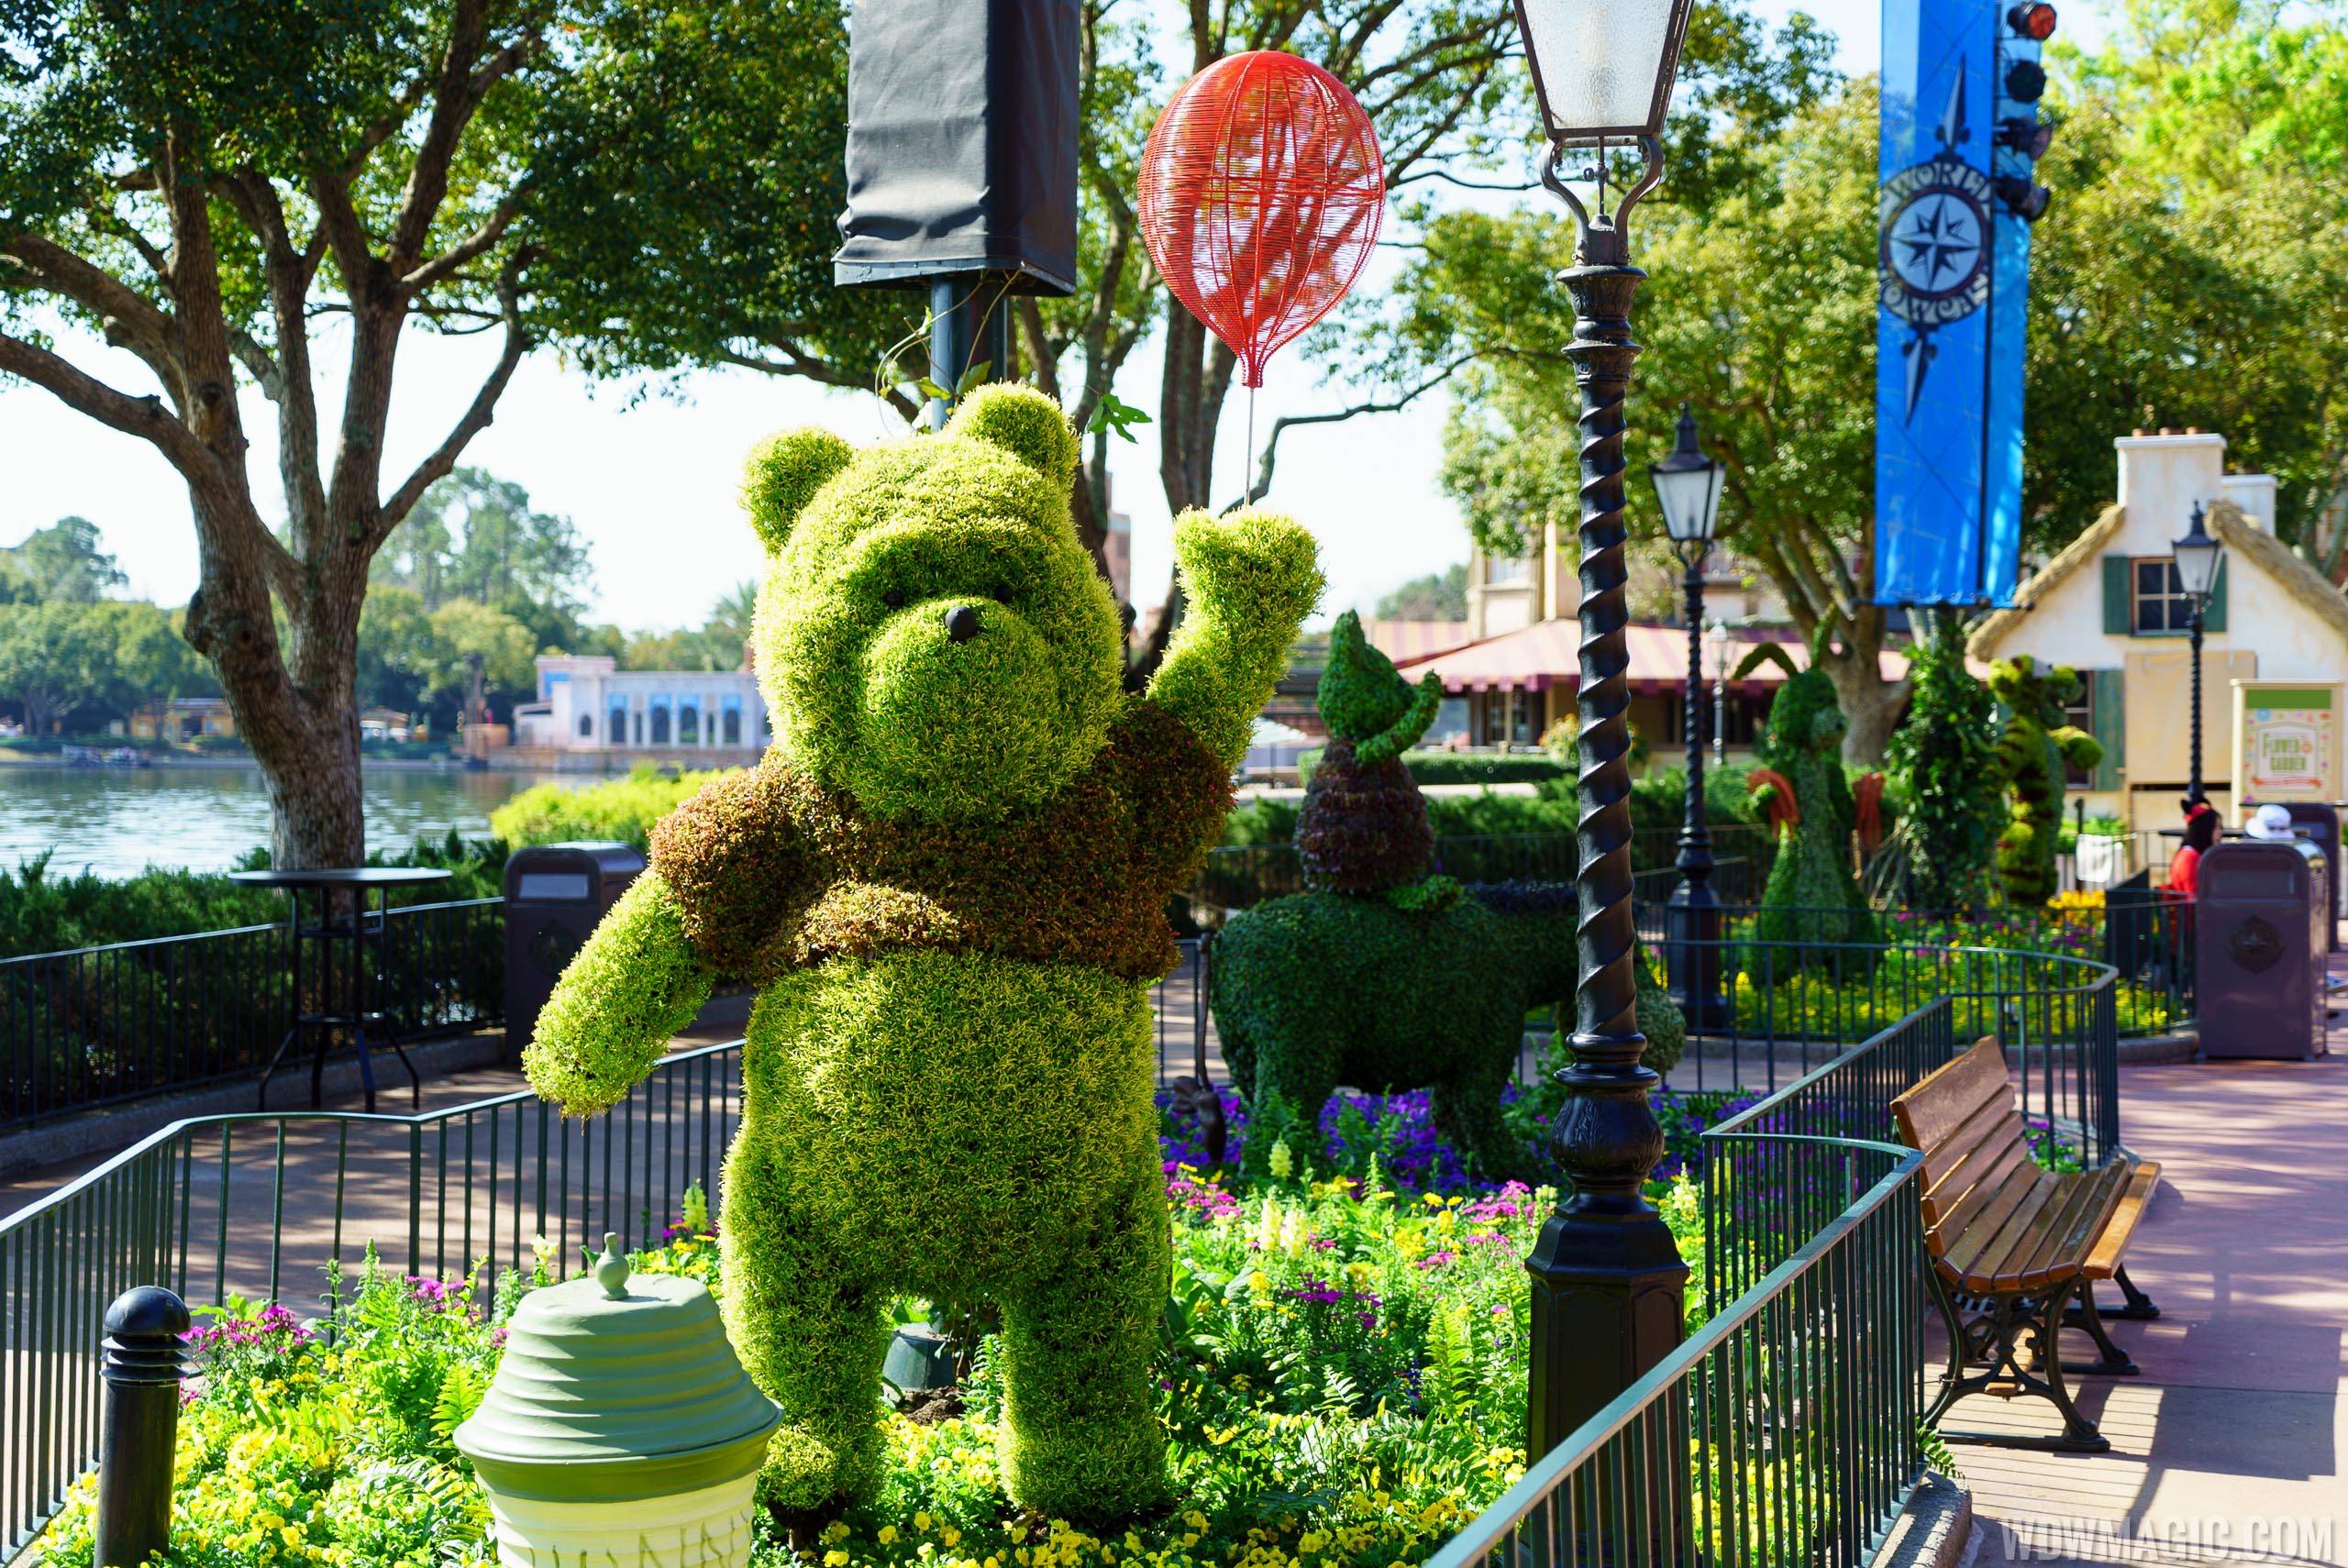 2016 Epcot International Flower and Garden Festival - Winnie the Pooh topiary in the UK